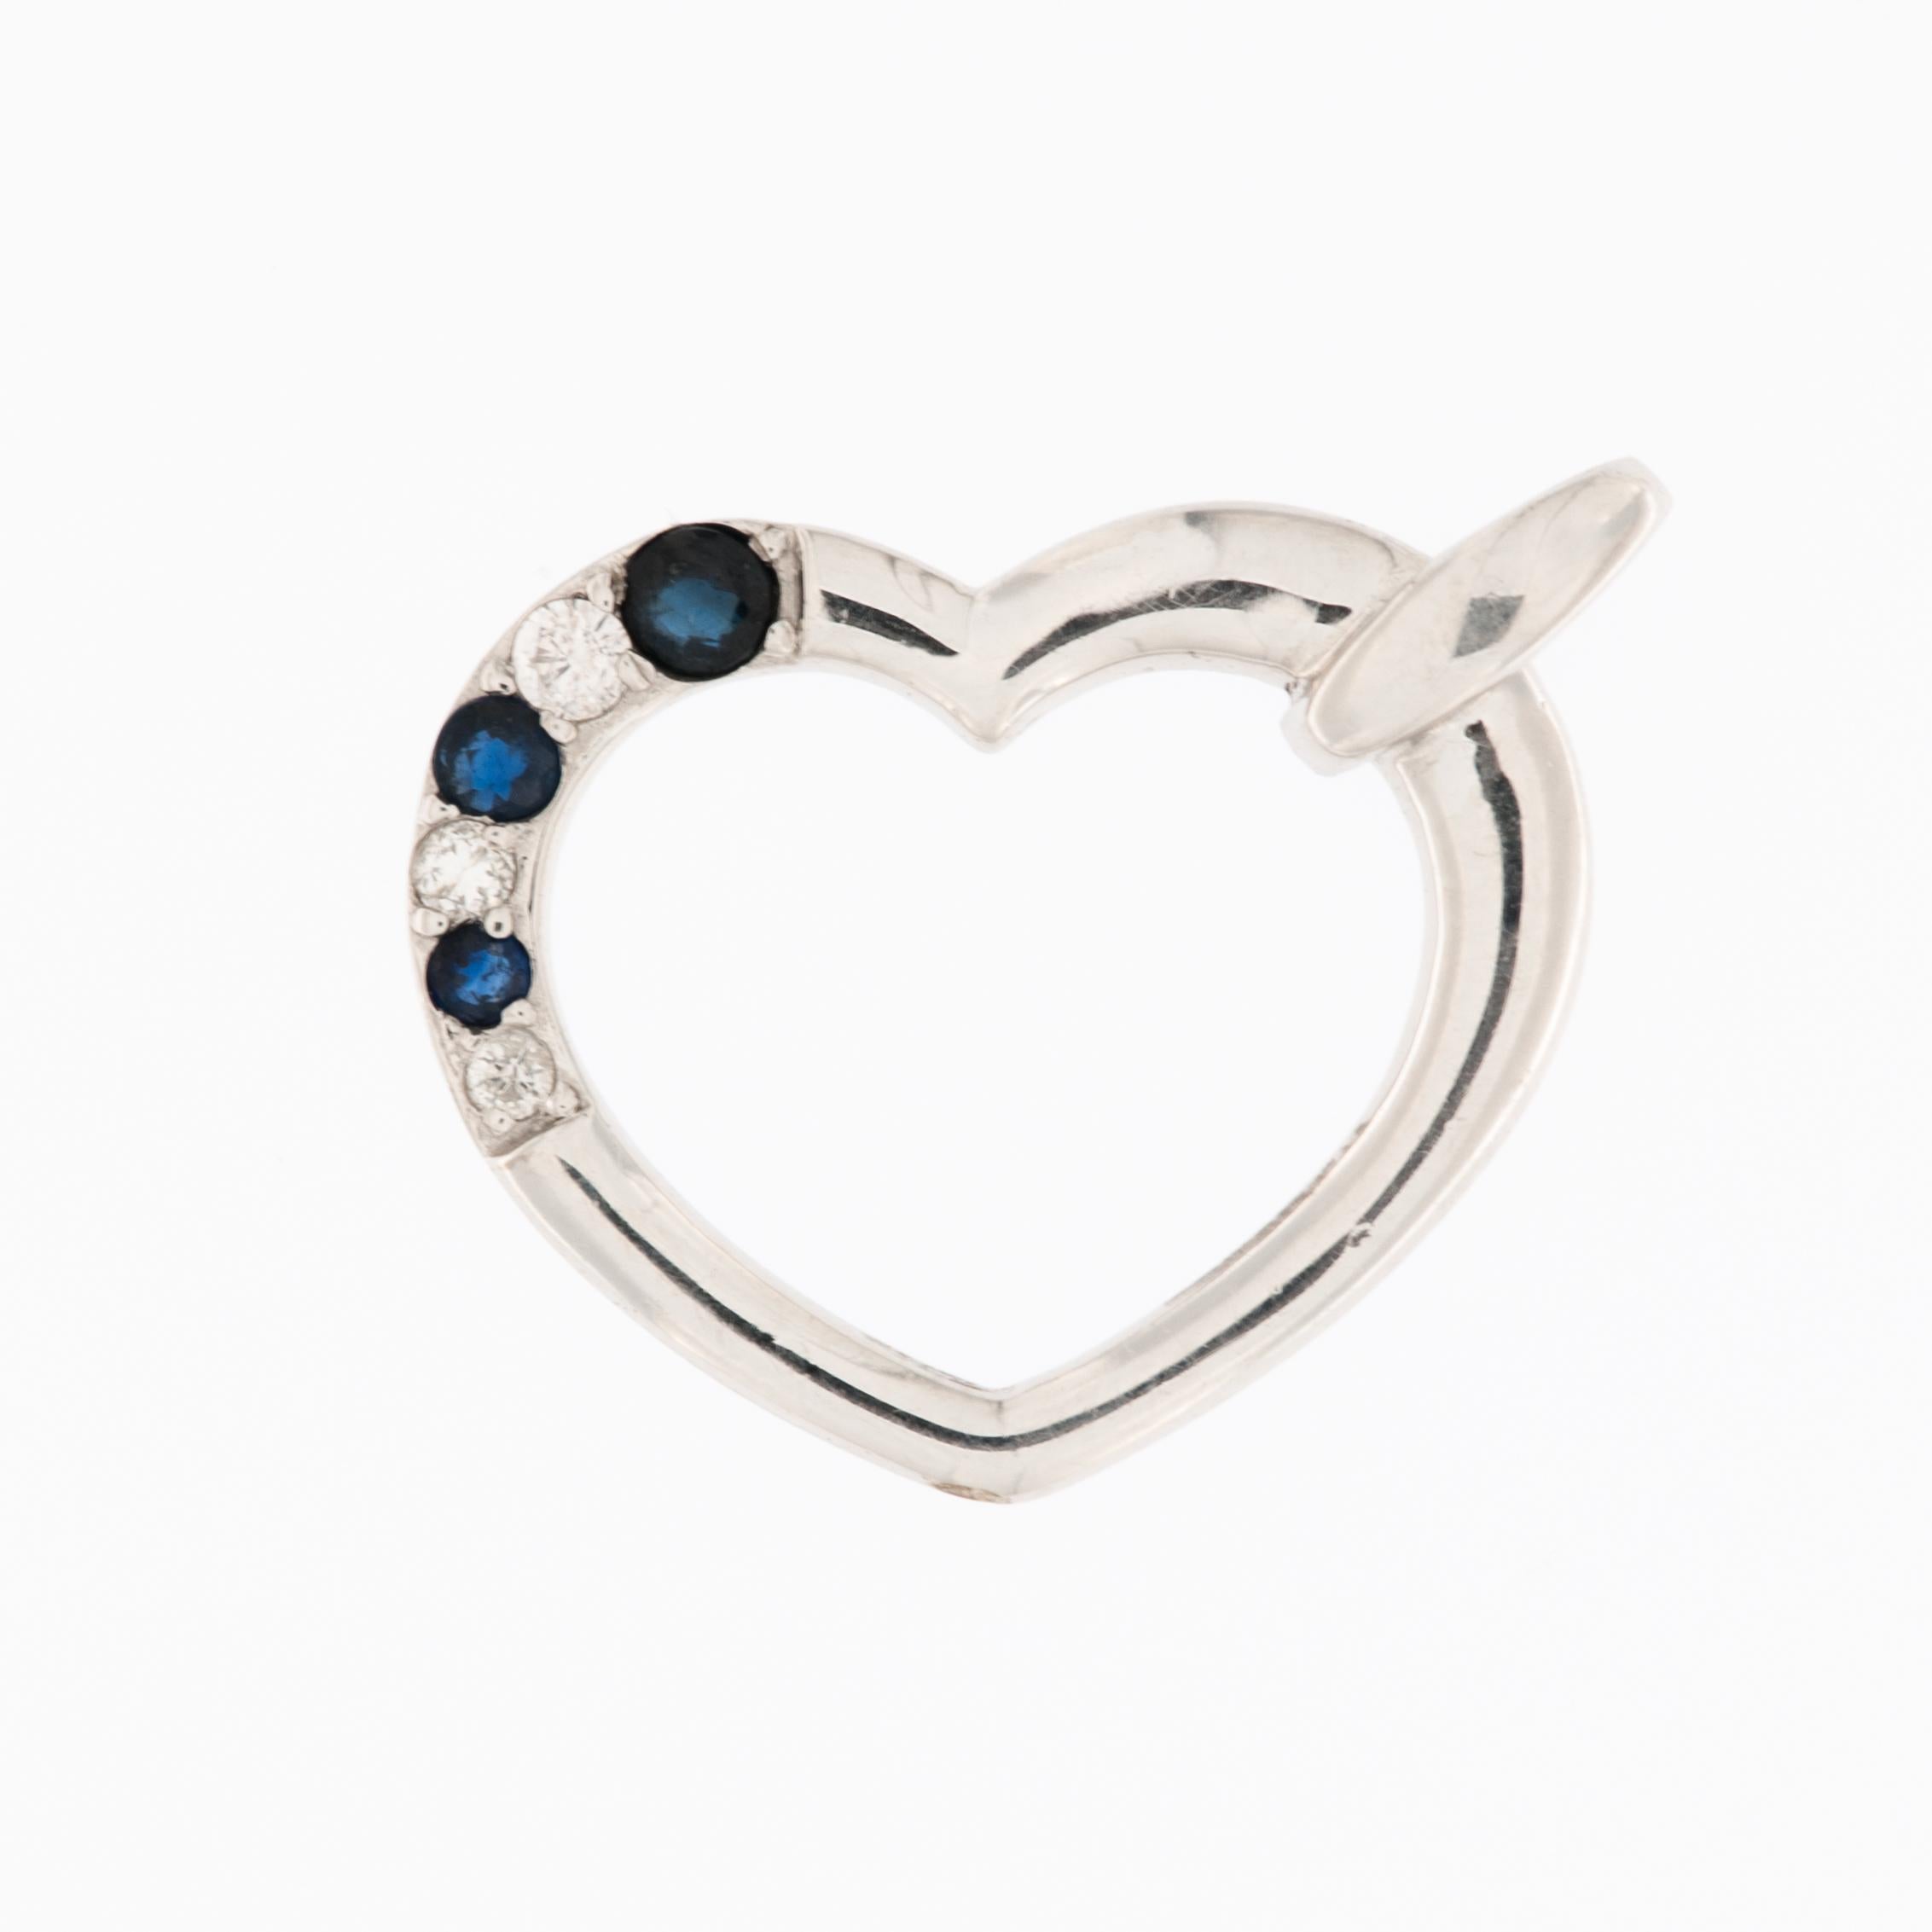 This Modern 9kt White Gold Heart Pendant is a captivating and romantic piece of jewelry, combining contemporary design with the timeless symbolism of love. Crafted from high-quality 9kt white gold, the pendant features a sleek and stylized heart